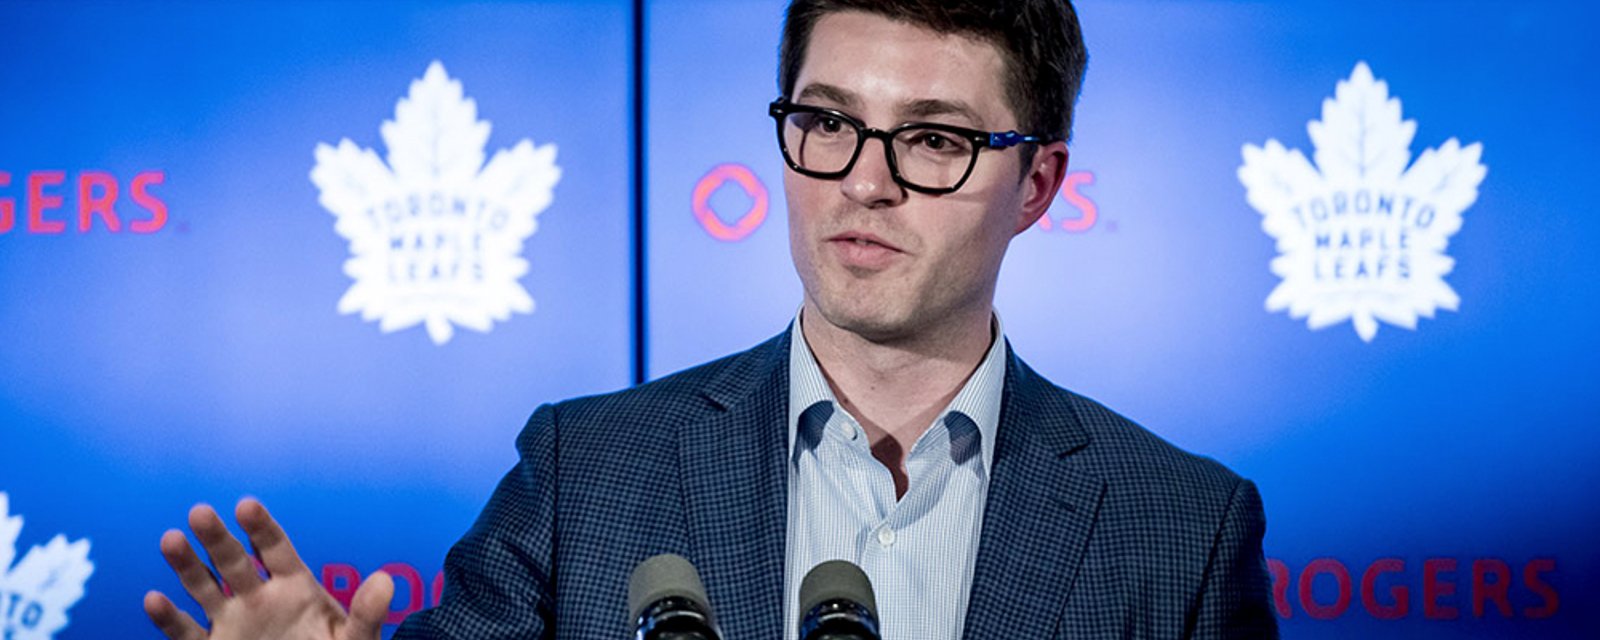 Dubas: Leafs creating curriculum for players to learn about equality issues